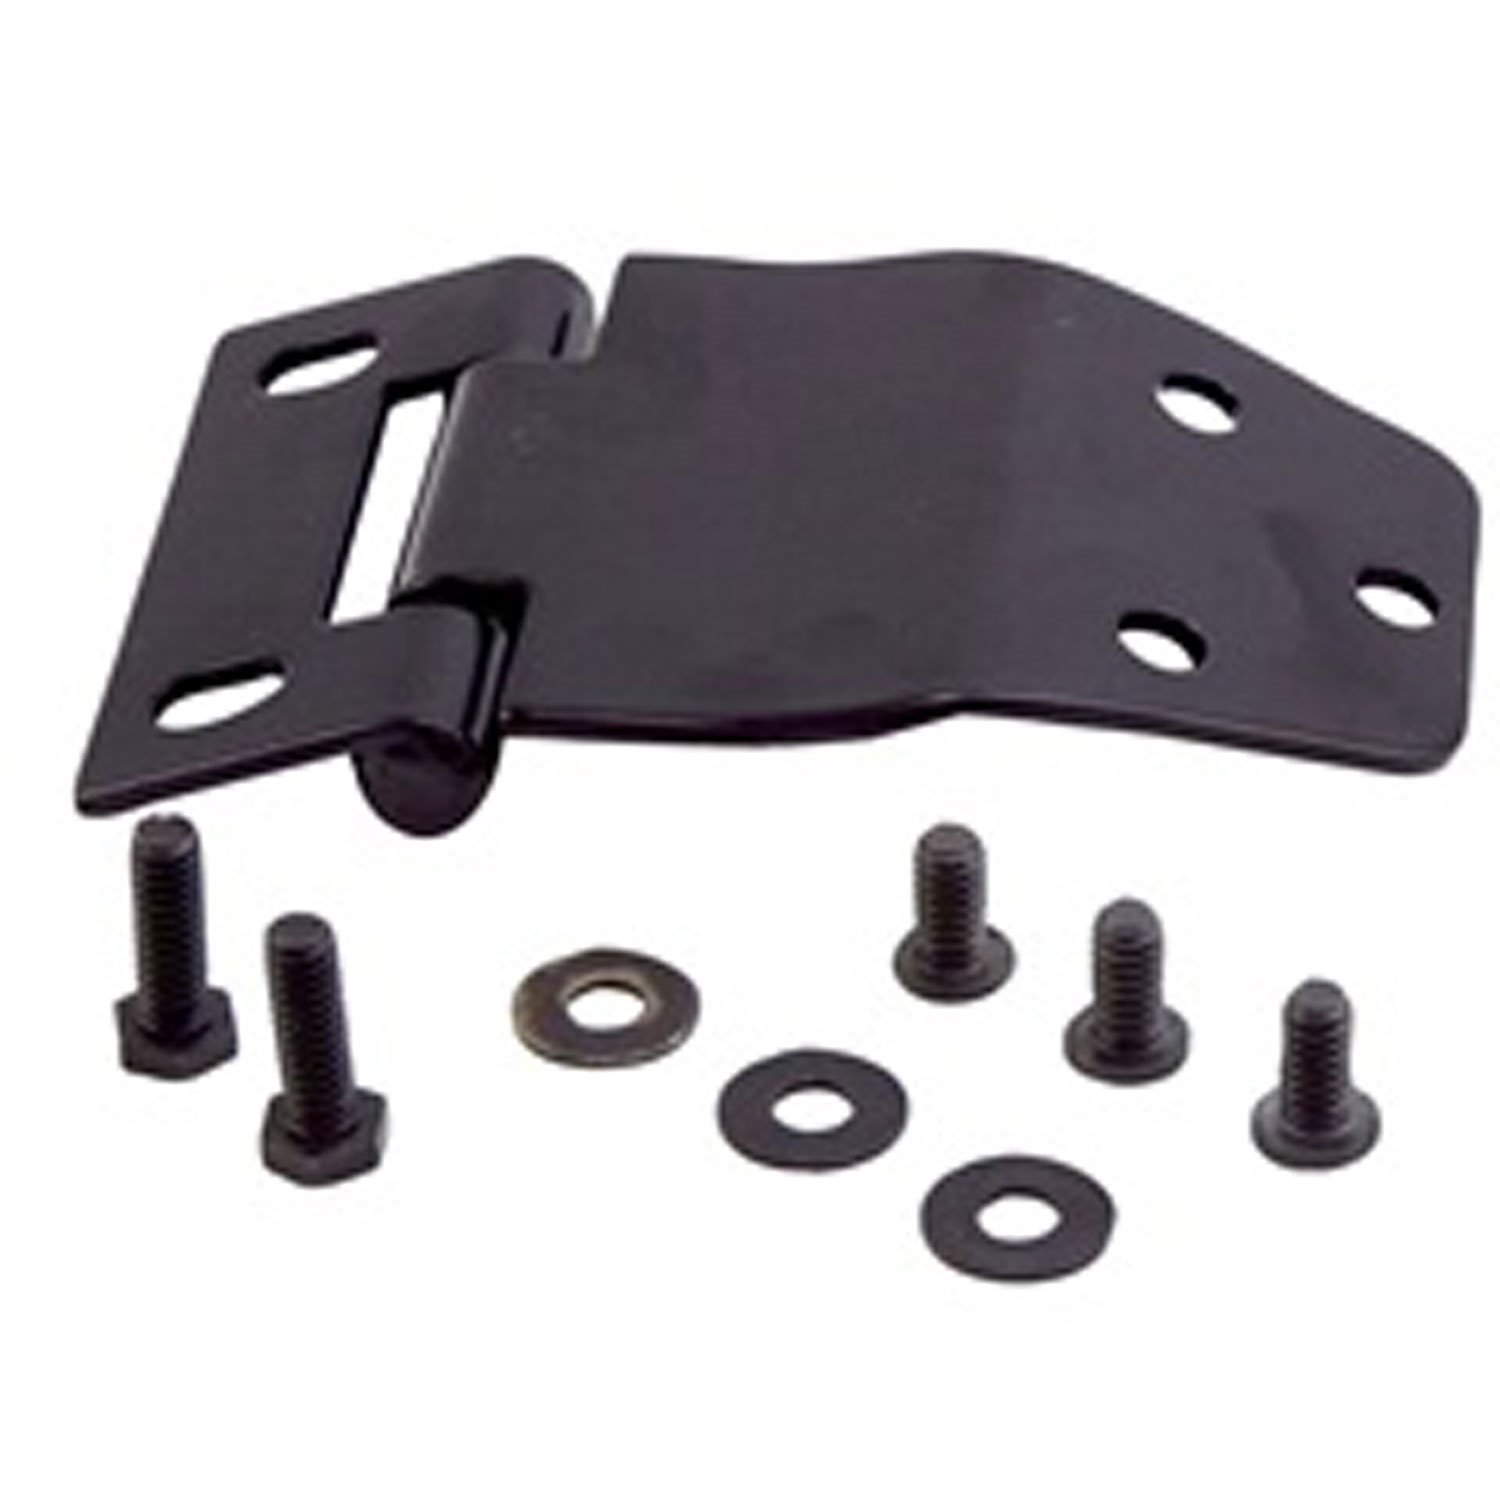 Replacement hardtop liftgate hinge from Omix-ADA, Fits 76-86 Jeep CJ7 and 81-86 CJ8 Scrambler F